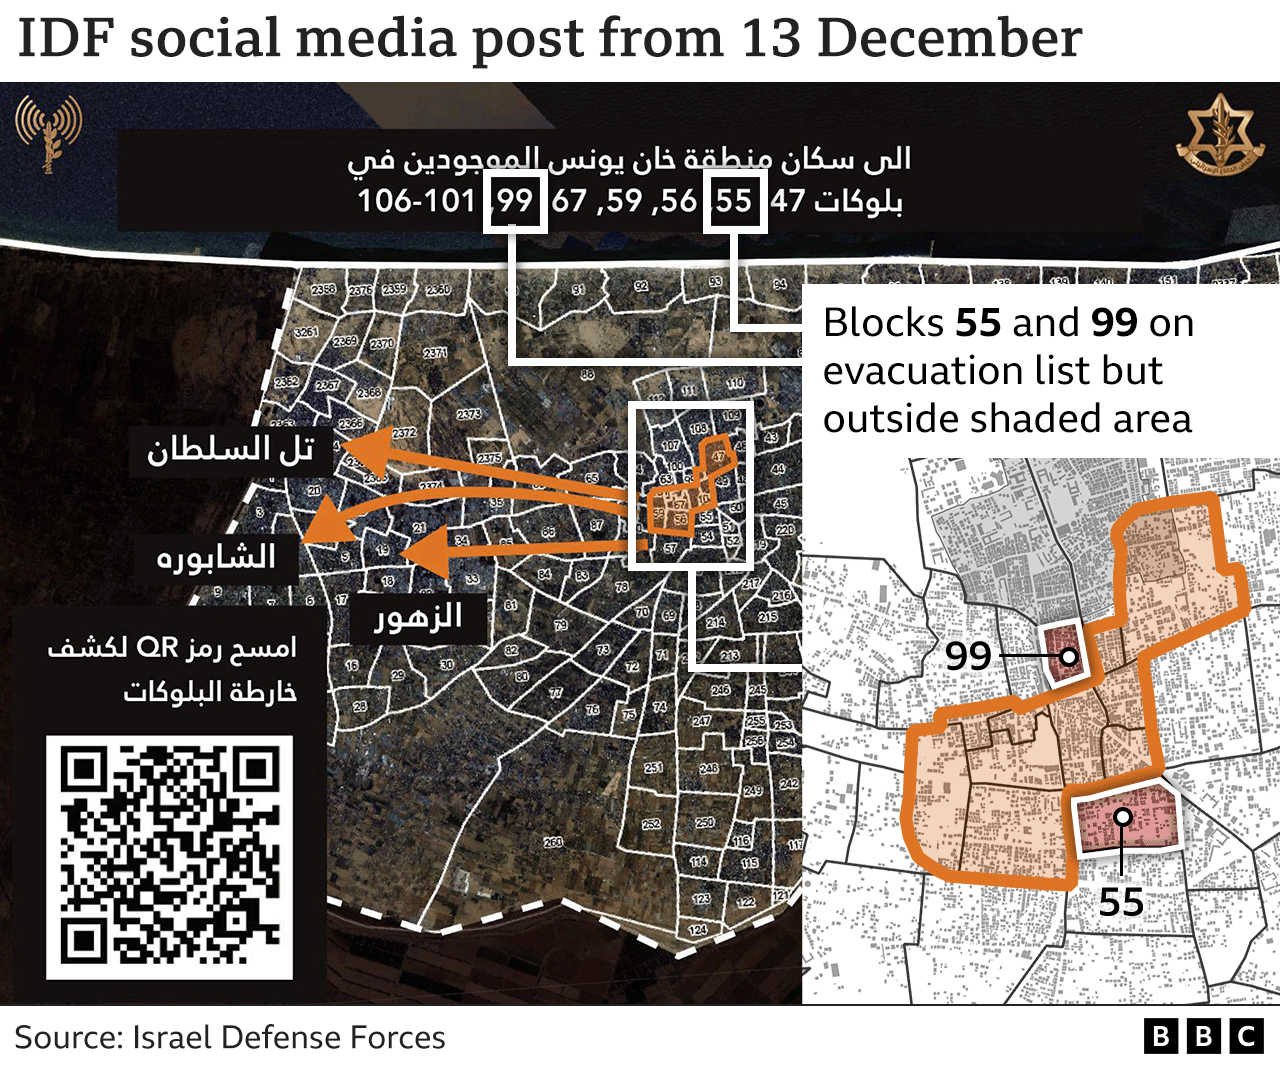 Graphic showing IDF social media post from 13 December which listed blocks 99 and 55 for evacuation even though they were outside the evacuation zone shown on the map